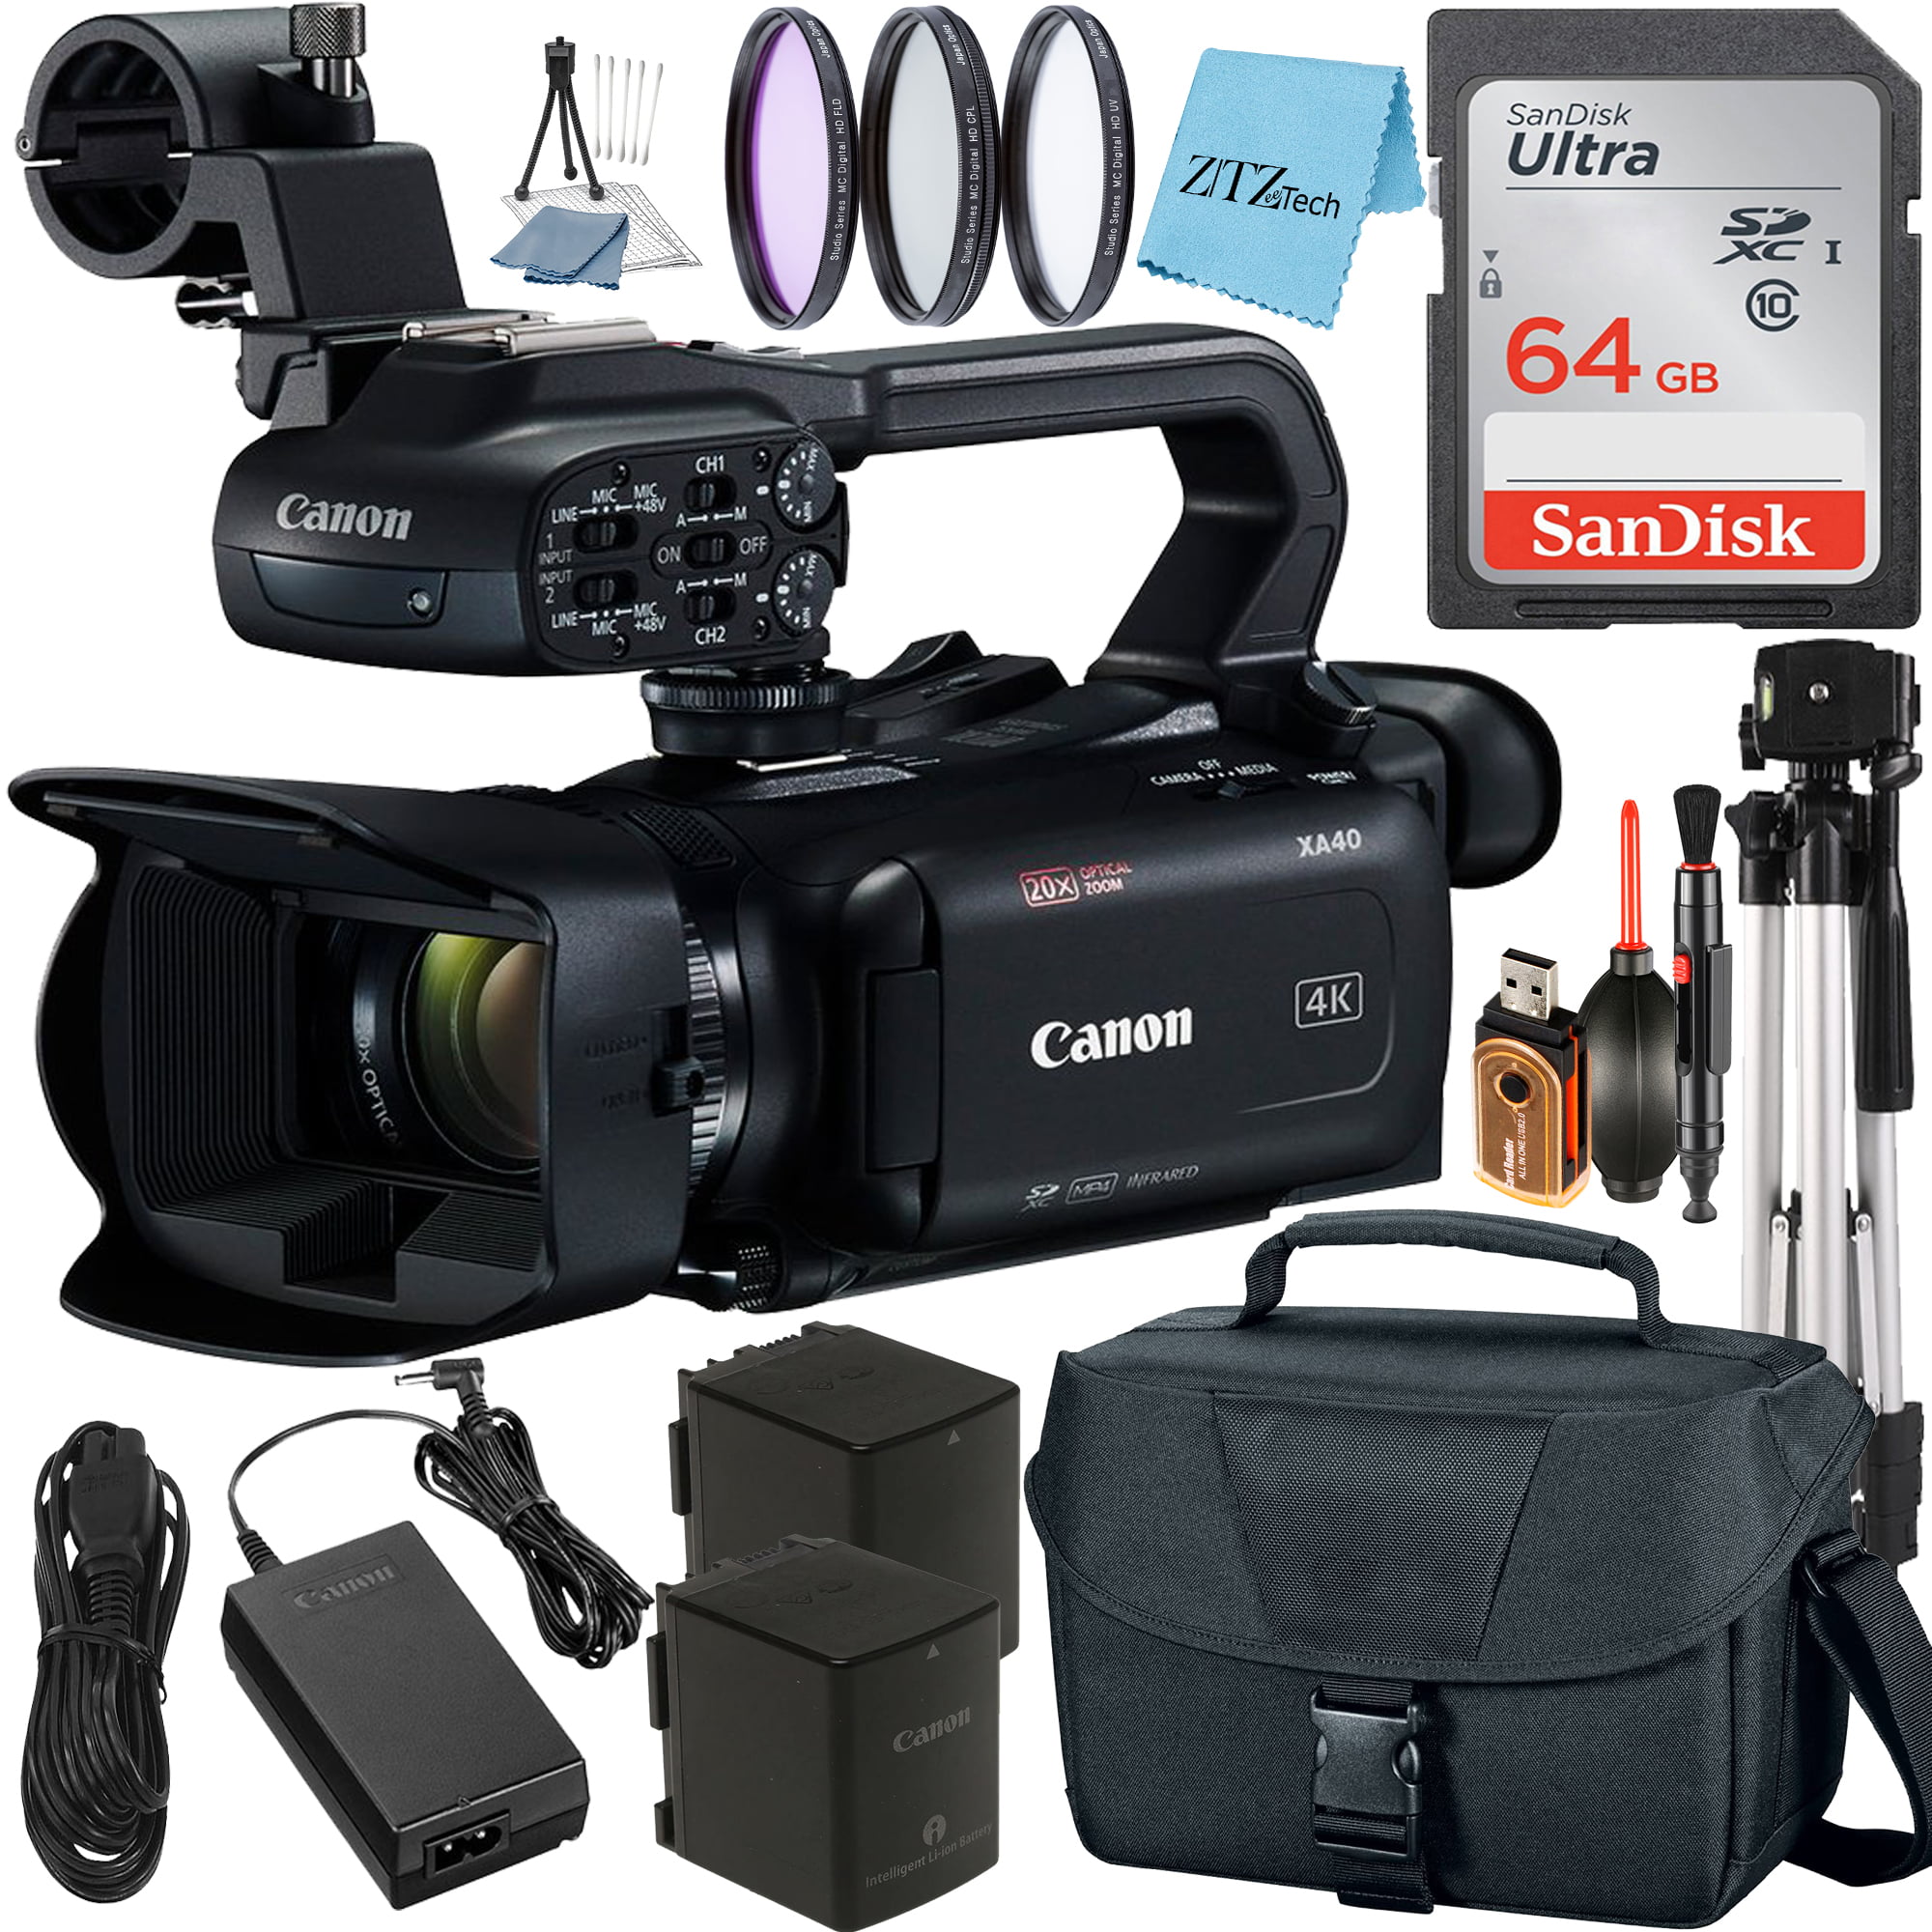 Tripod Case Canon XA40 Professional UHD 4K Video Camcorder with 2 Pack 64GB SanDisk Memory Card Filter Kit ZeeTech Accessory Bundle Microphone 